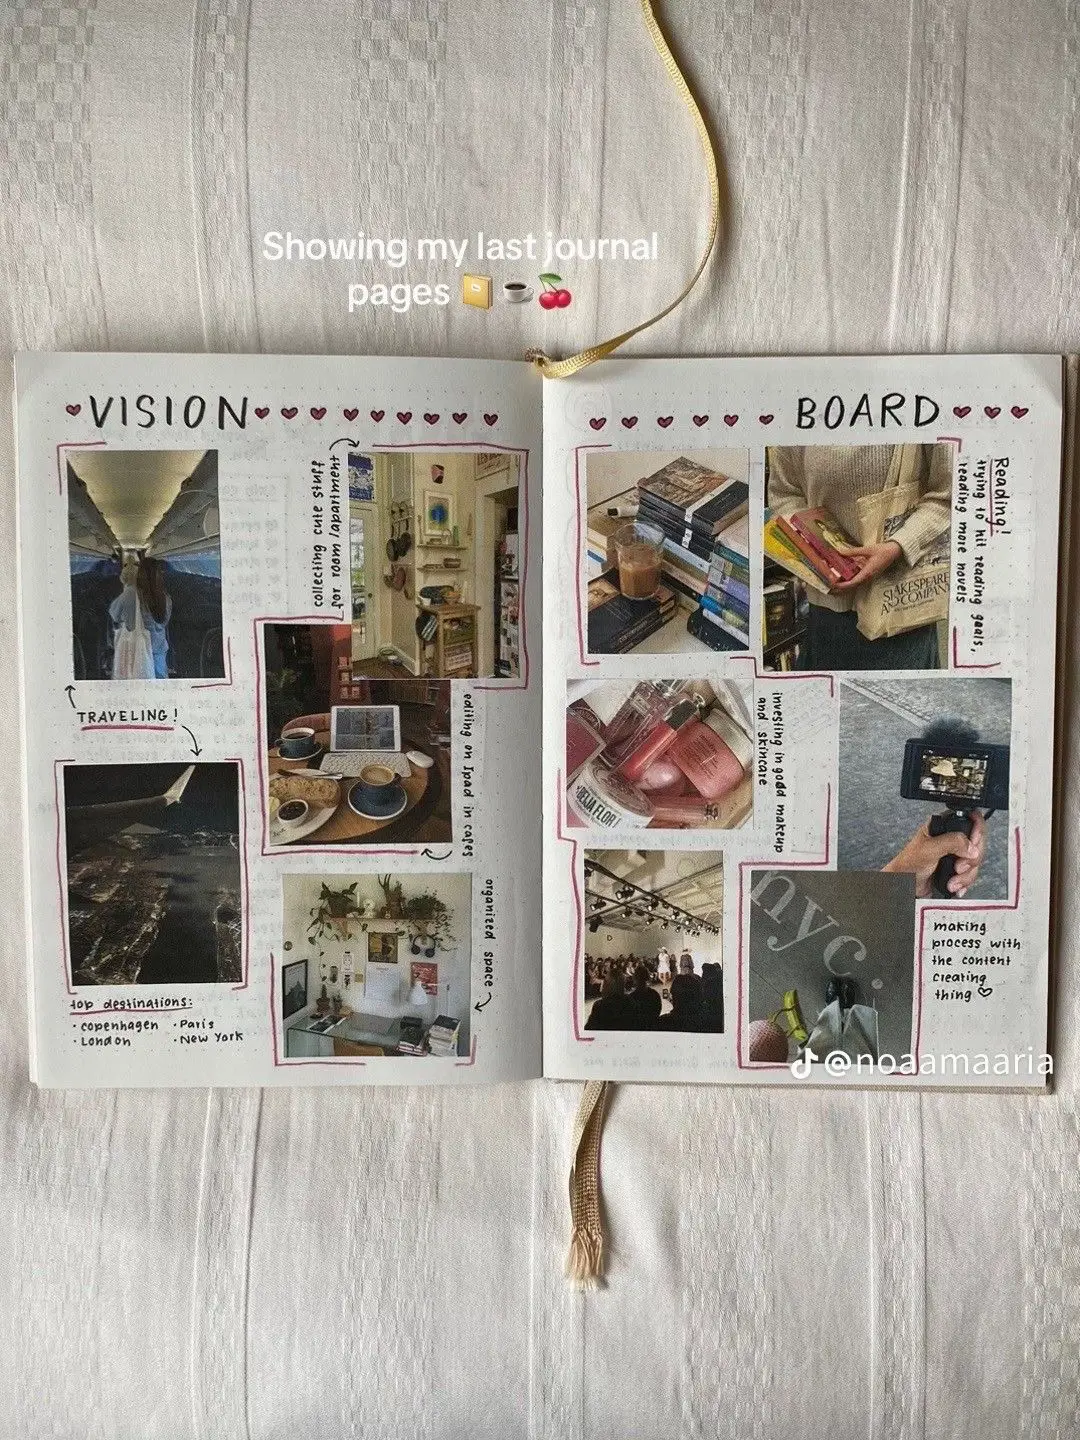  A book with a vision board